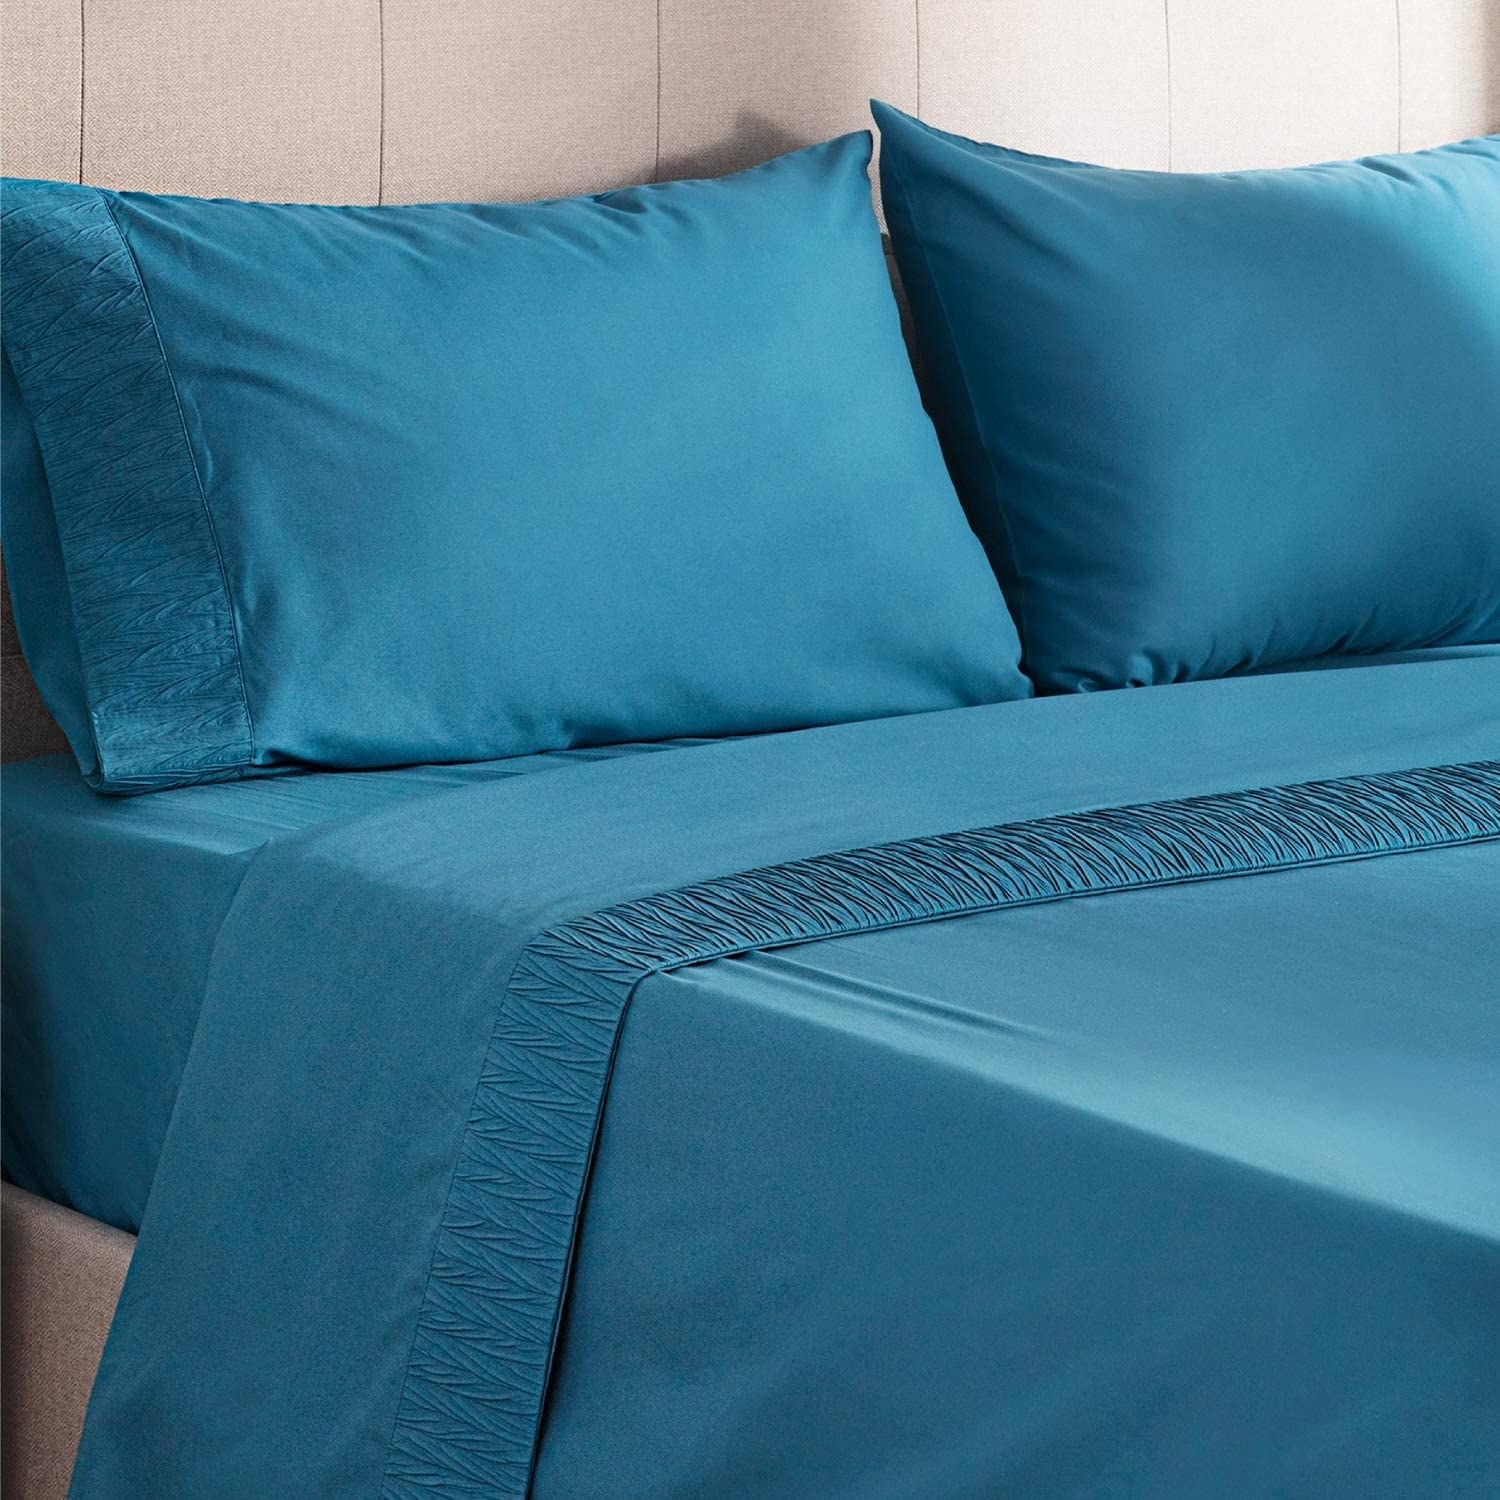 The sheets in teal on a bed